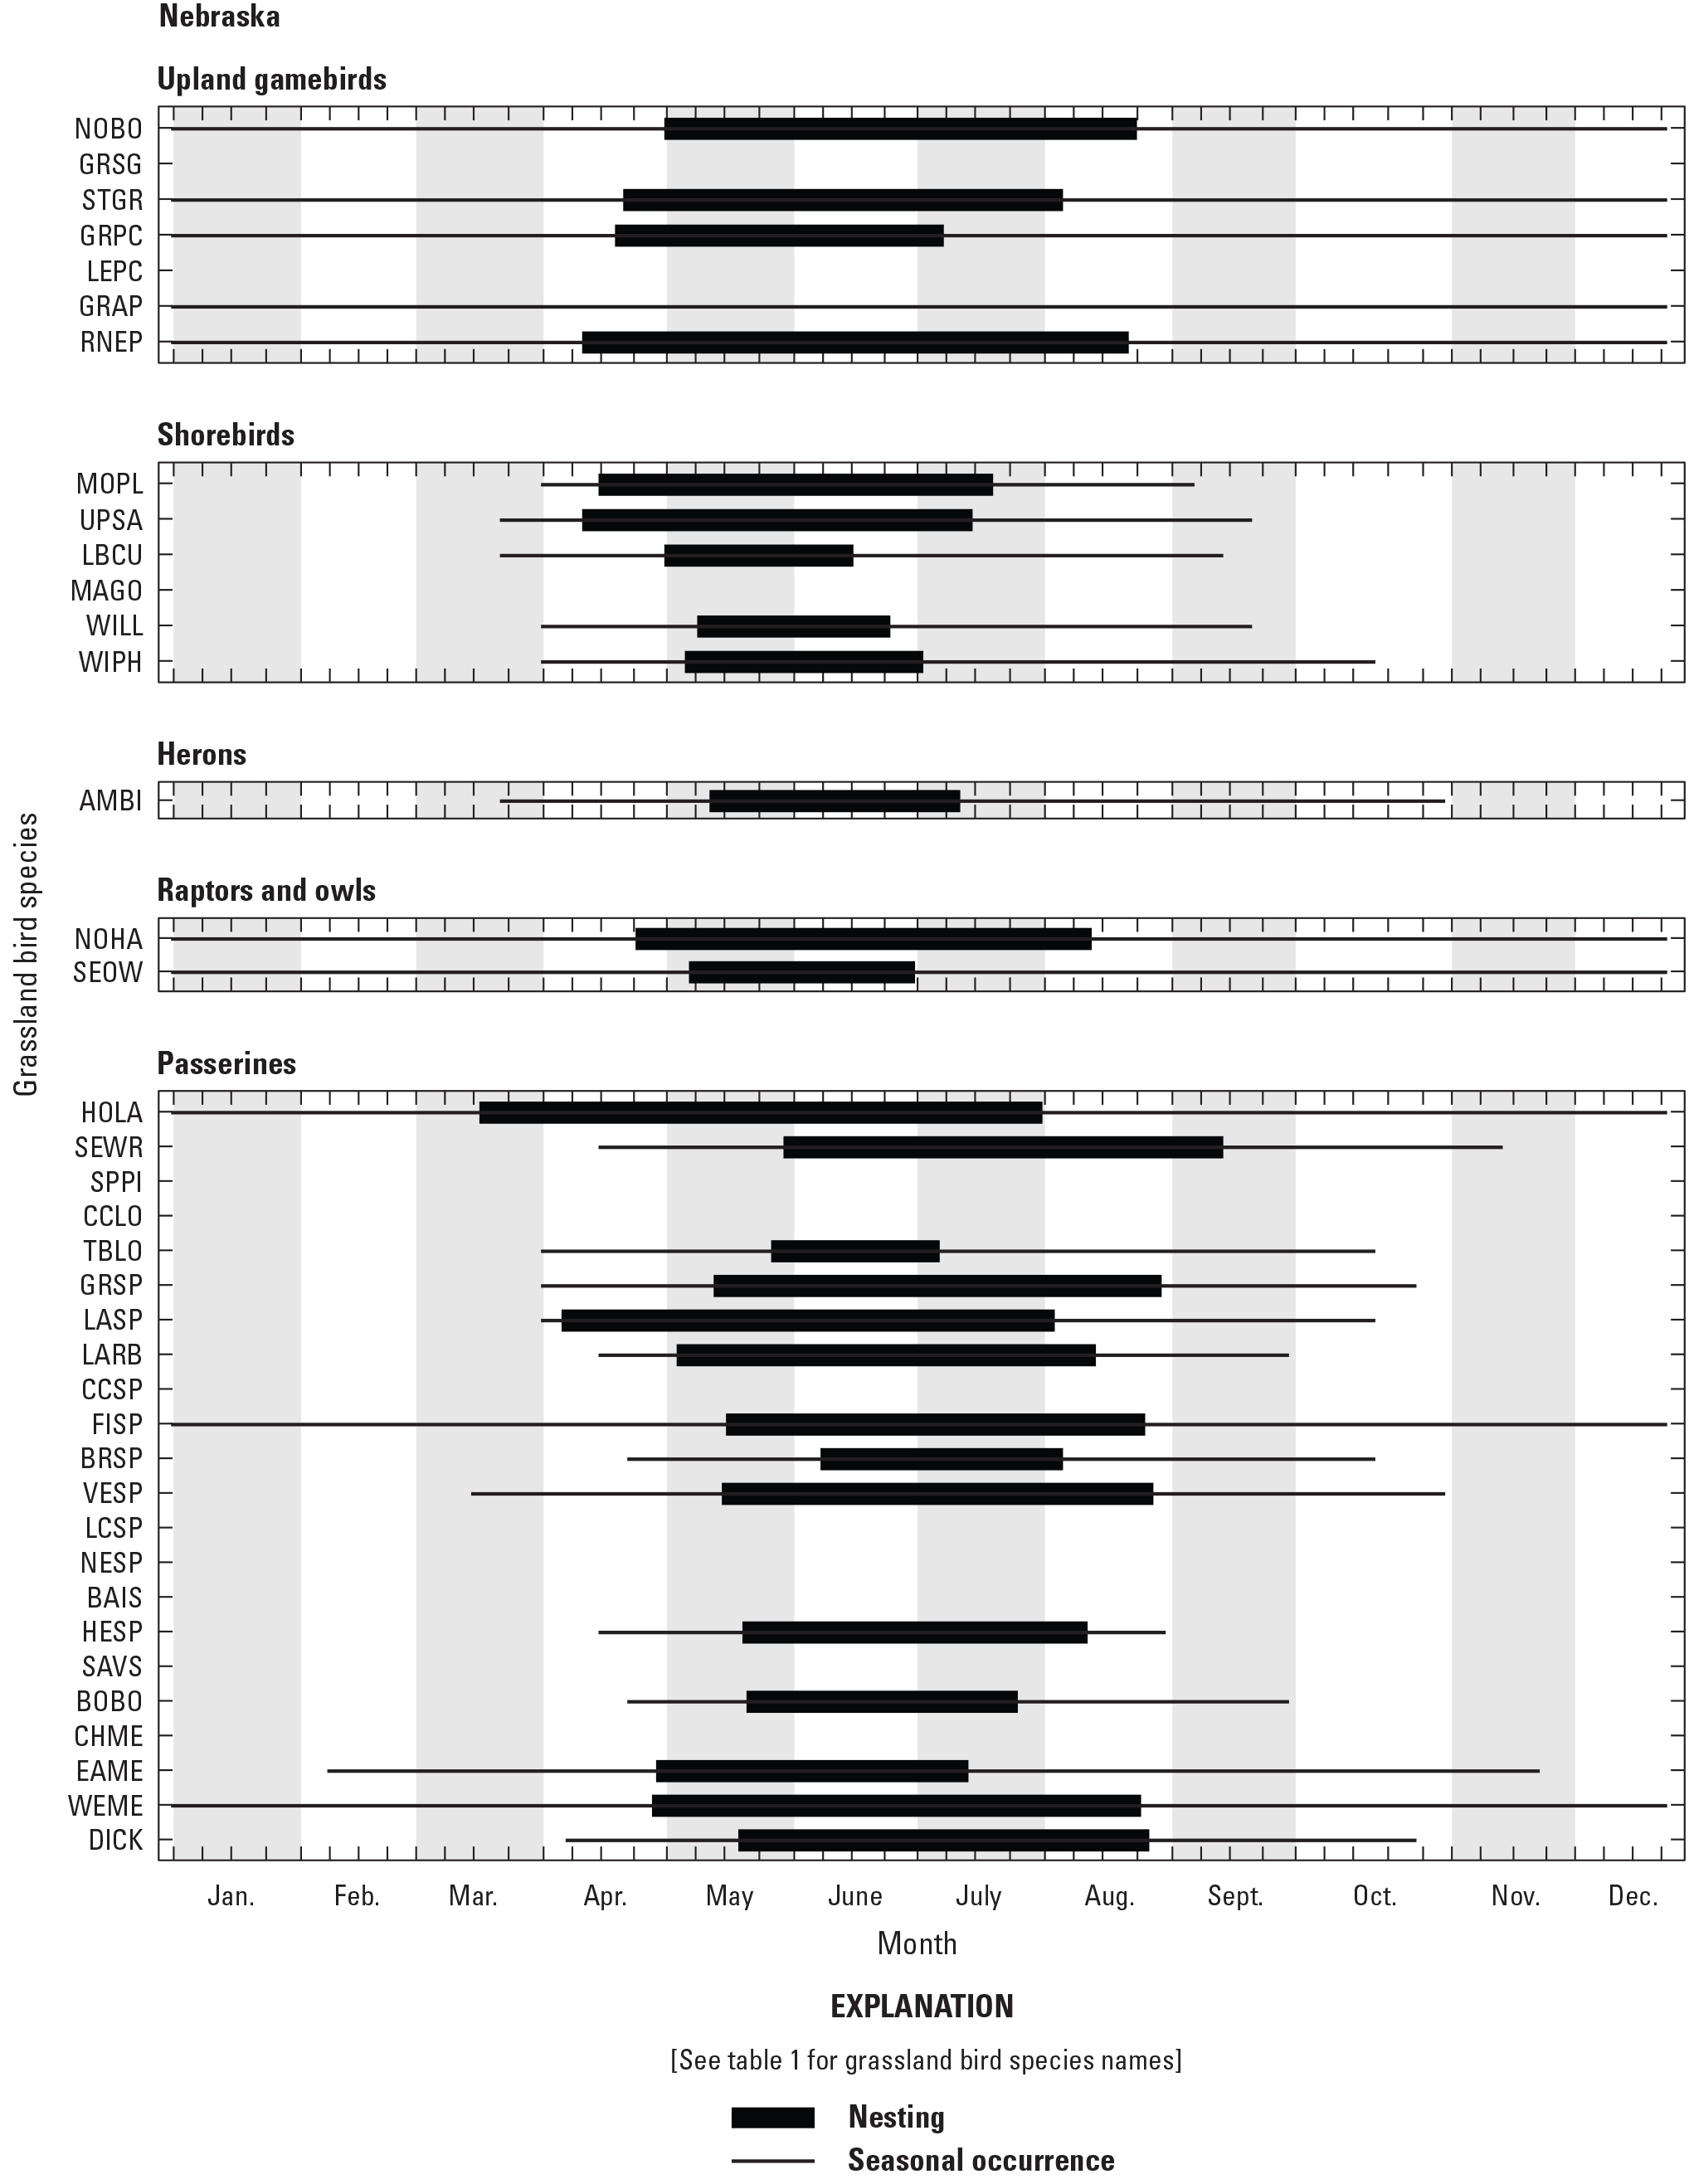 Figure showing seasonal occurrence and nesting phenology for 38 grassland bird species
               in Nebraska, United States.